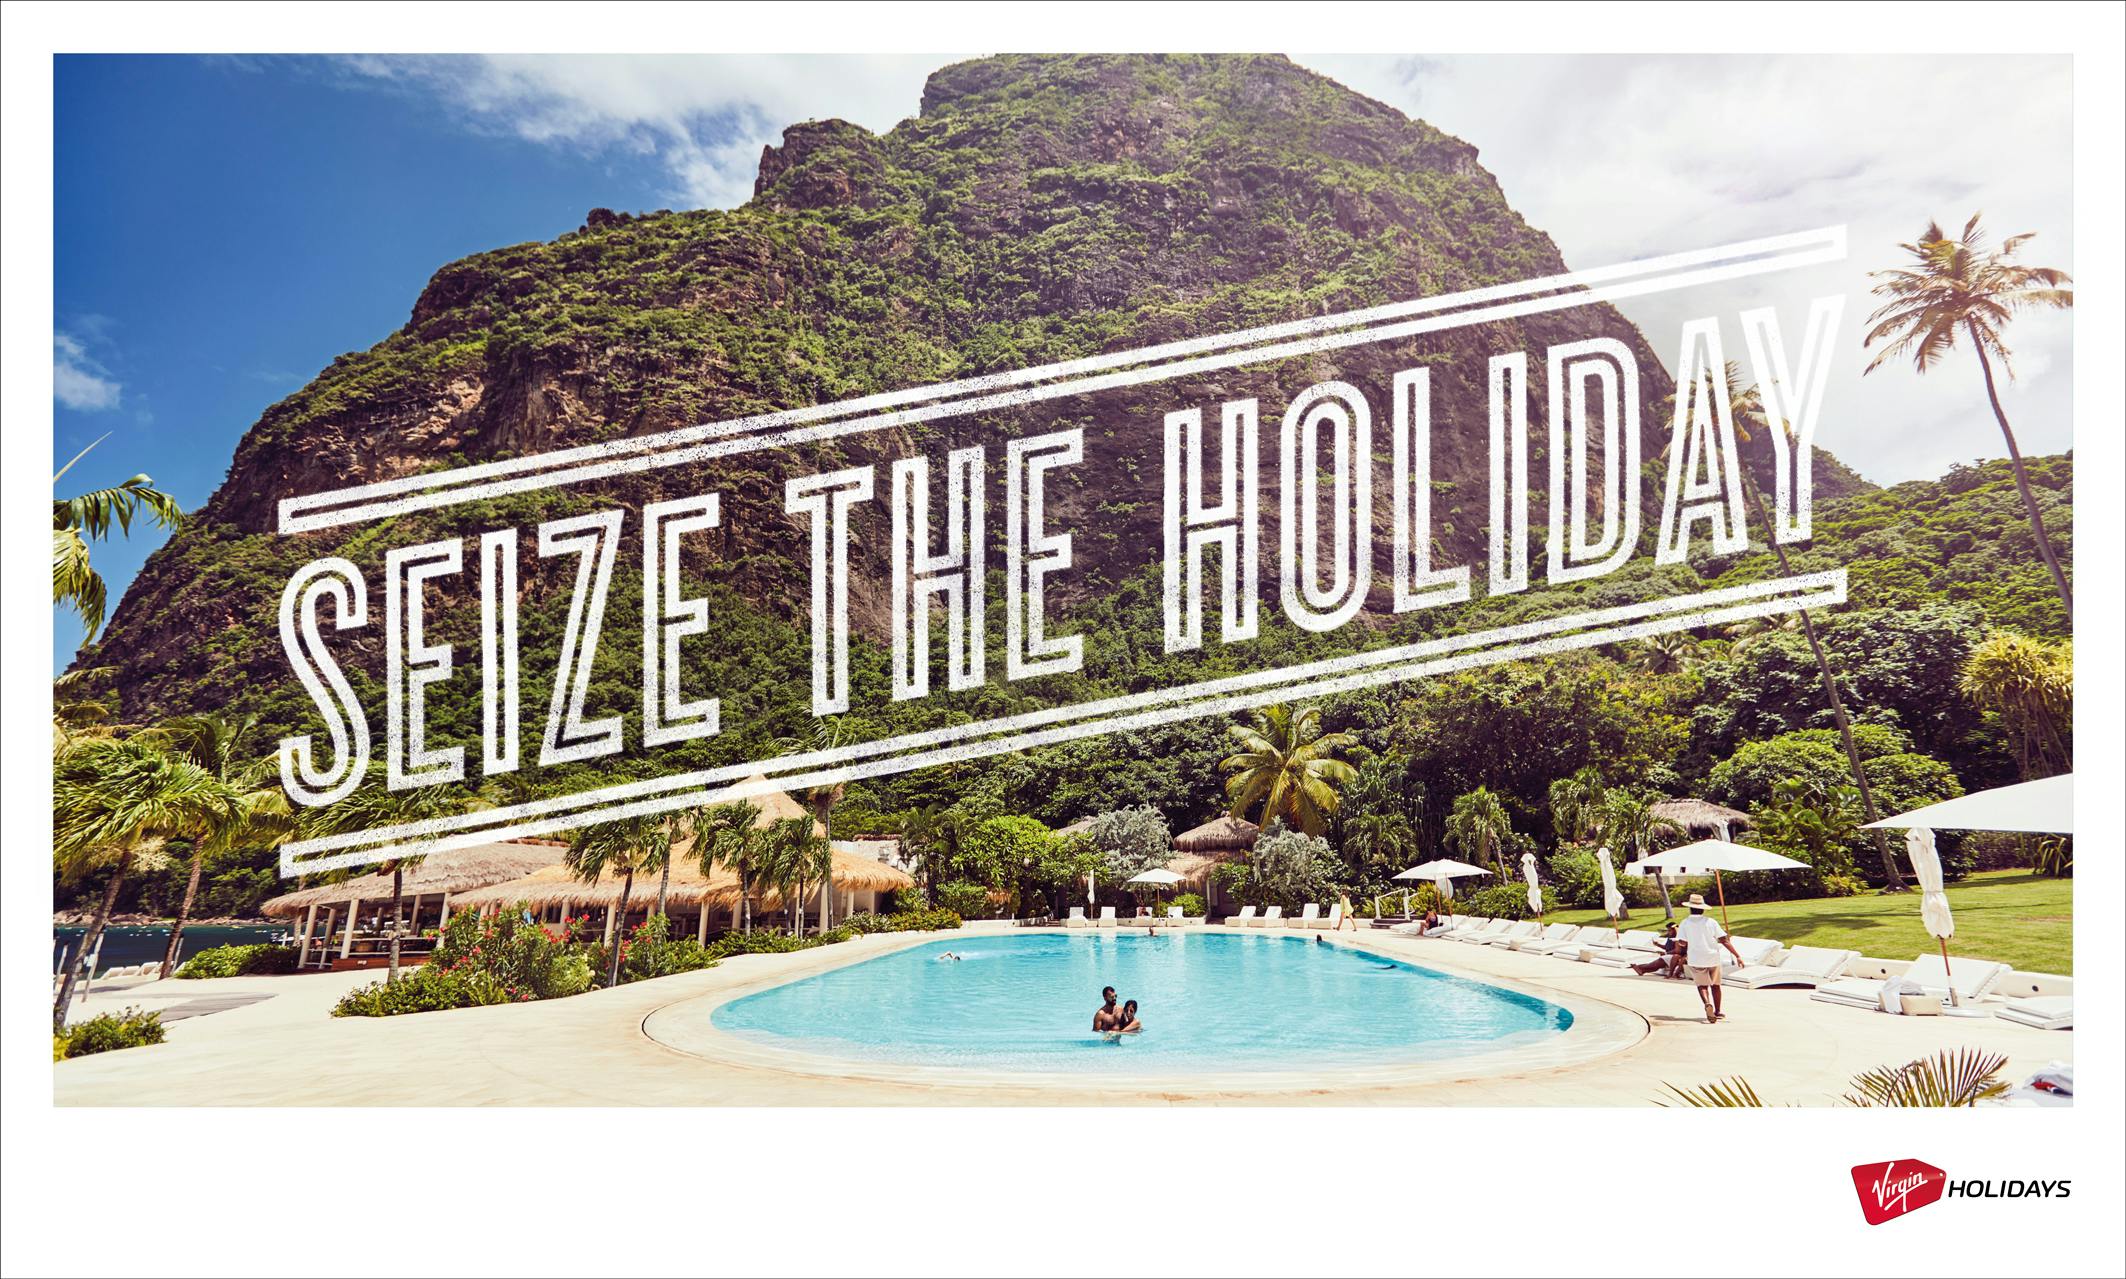 How Virgin Holidays is going beyond bookings to ‘inspire change’